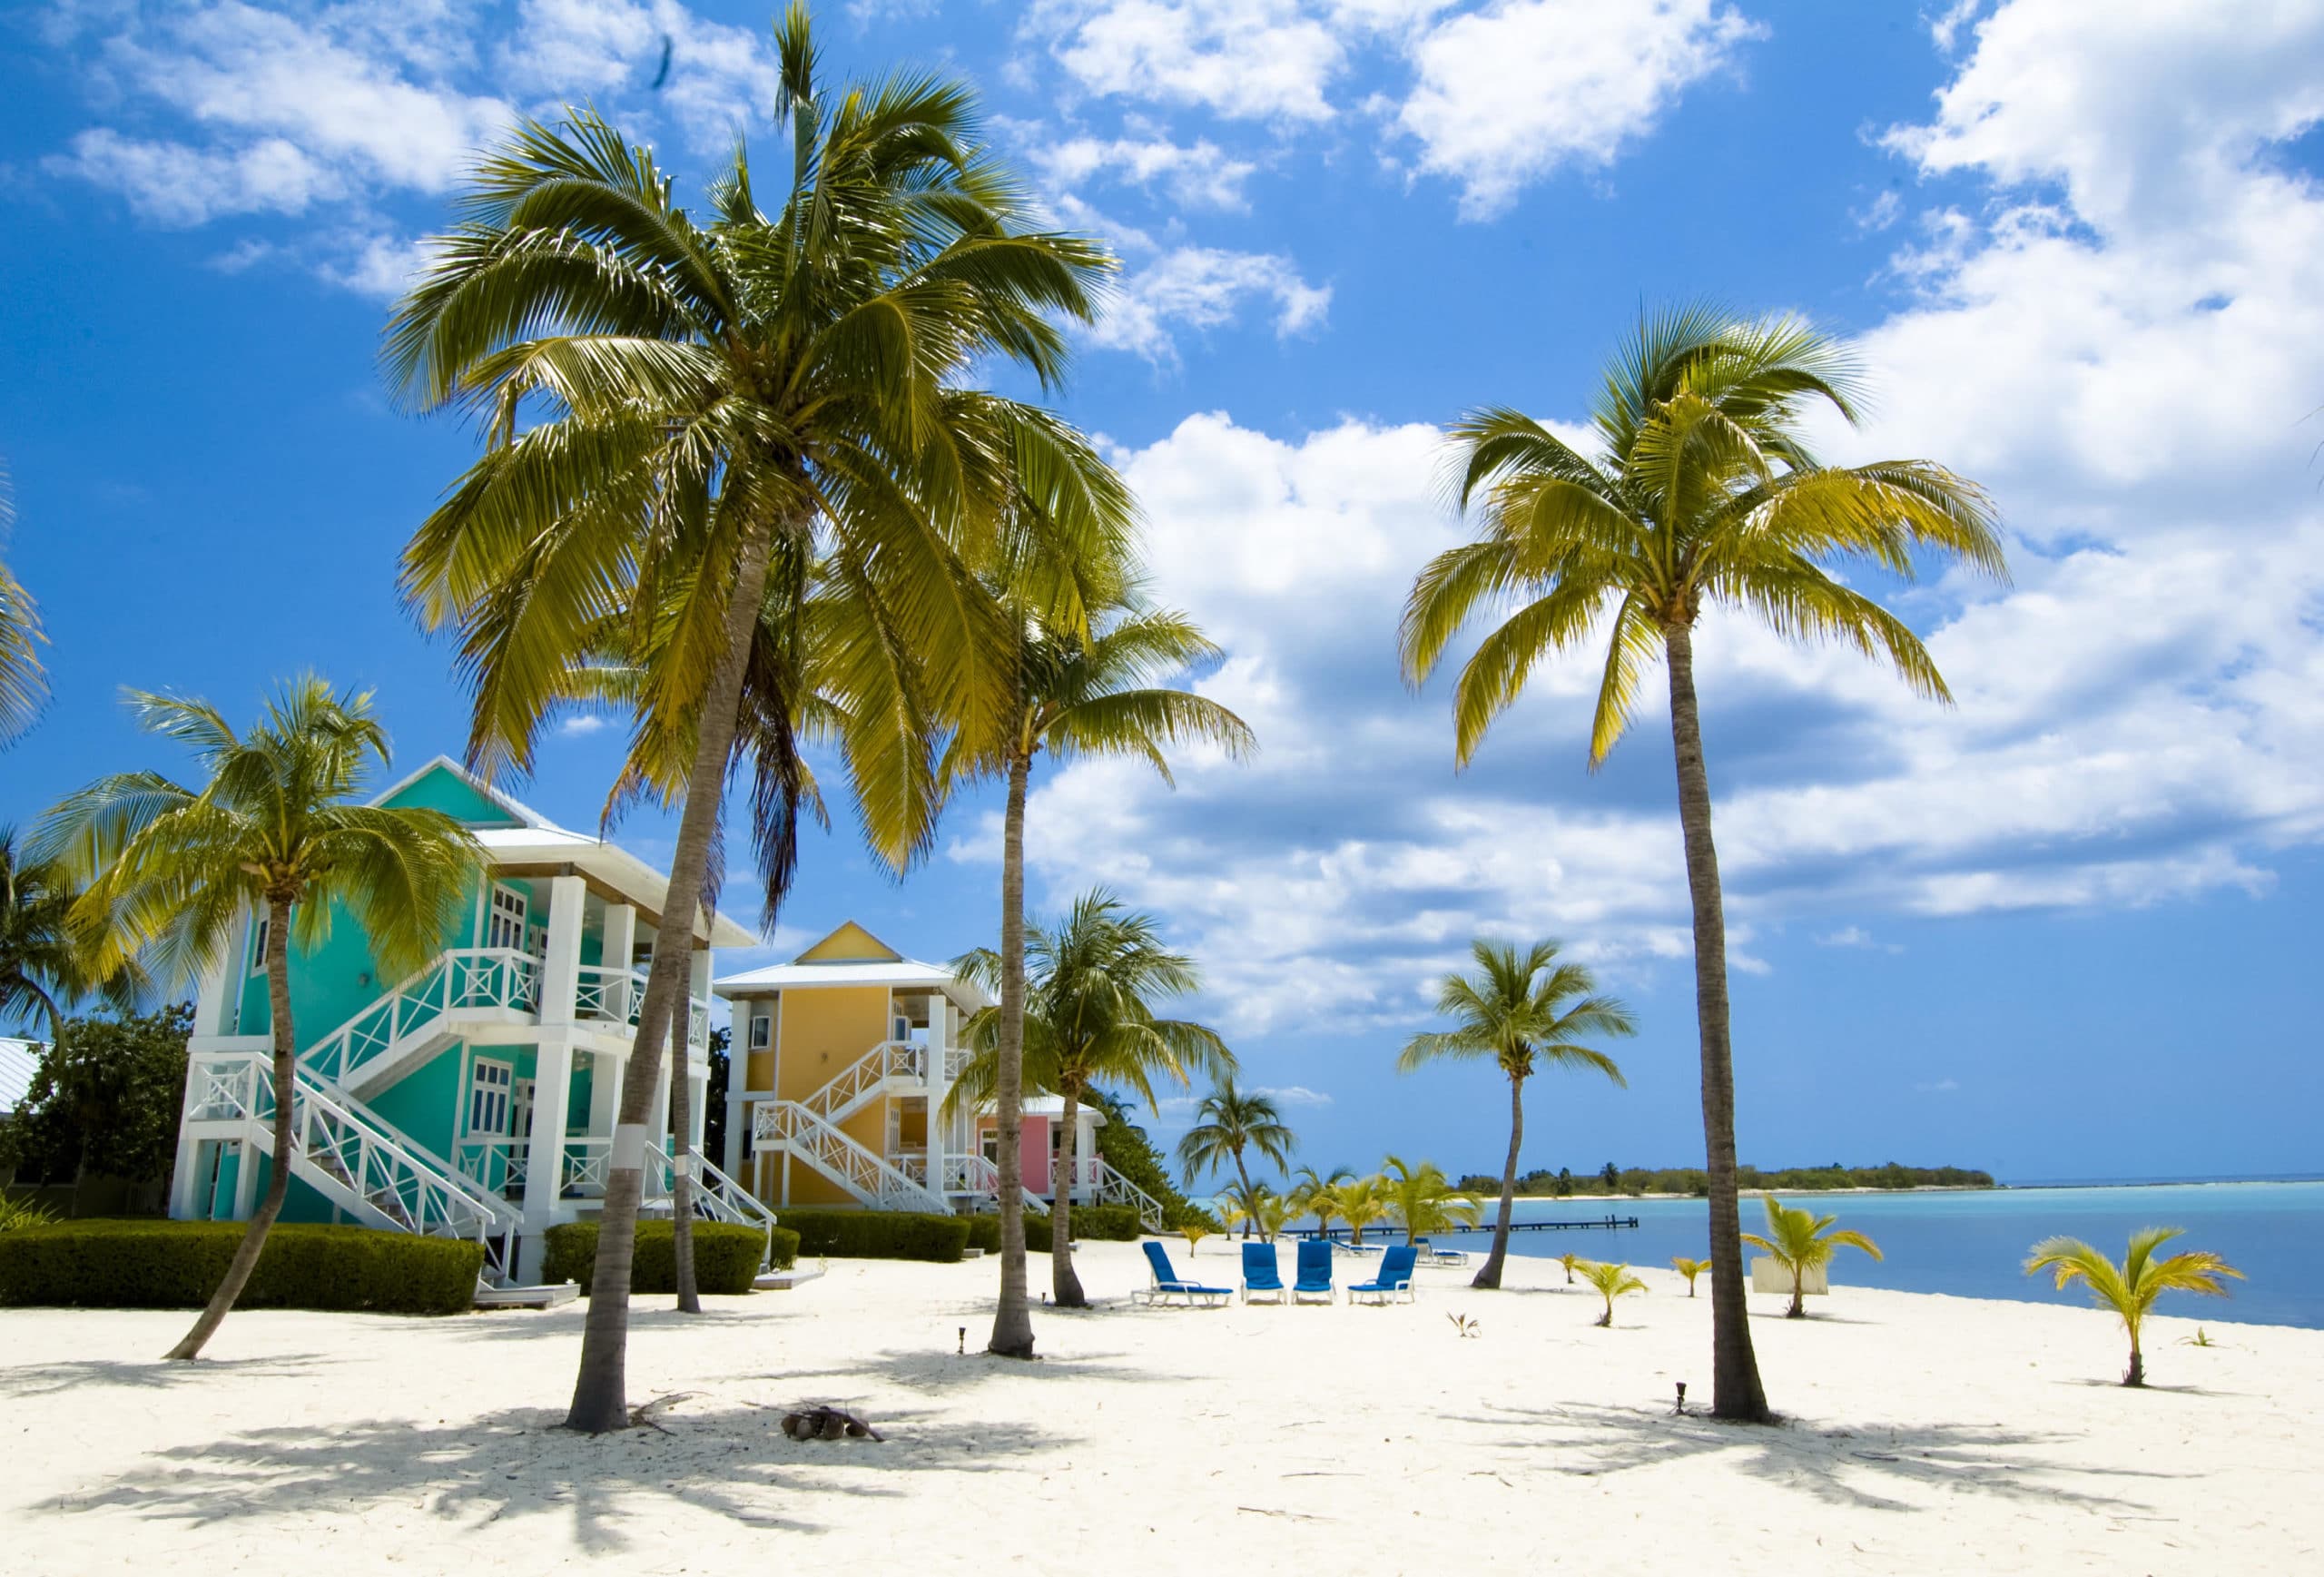 The Cayman Islands - 3 Islands to explore but each so different ...